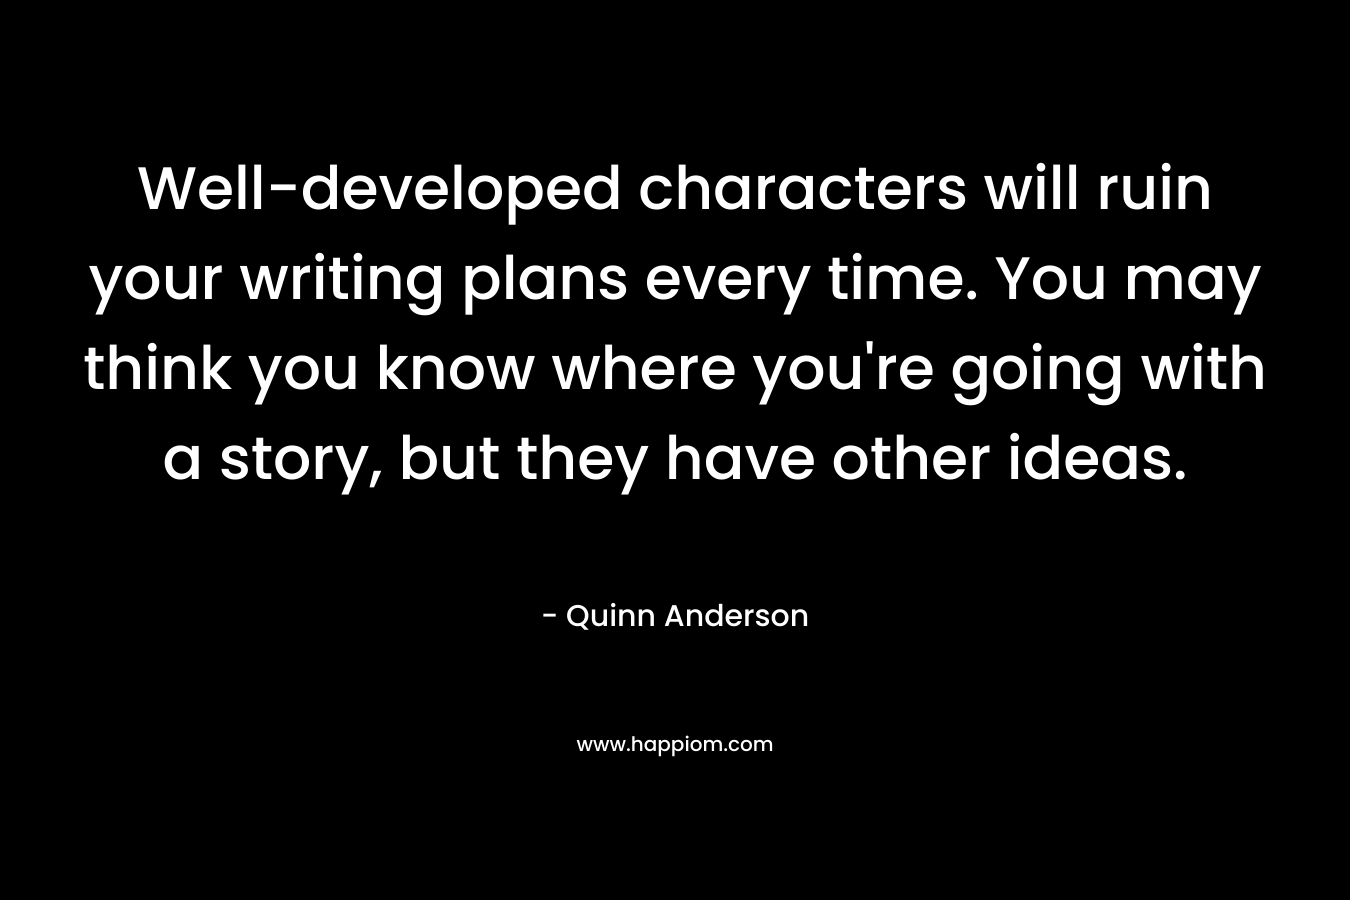 Well-developed characters will ruin your writing plans every time. You may think you know where you're going with a story, but they have other ideas.